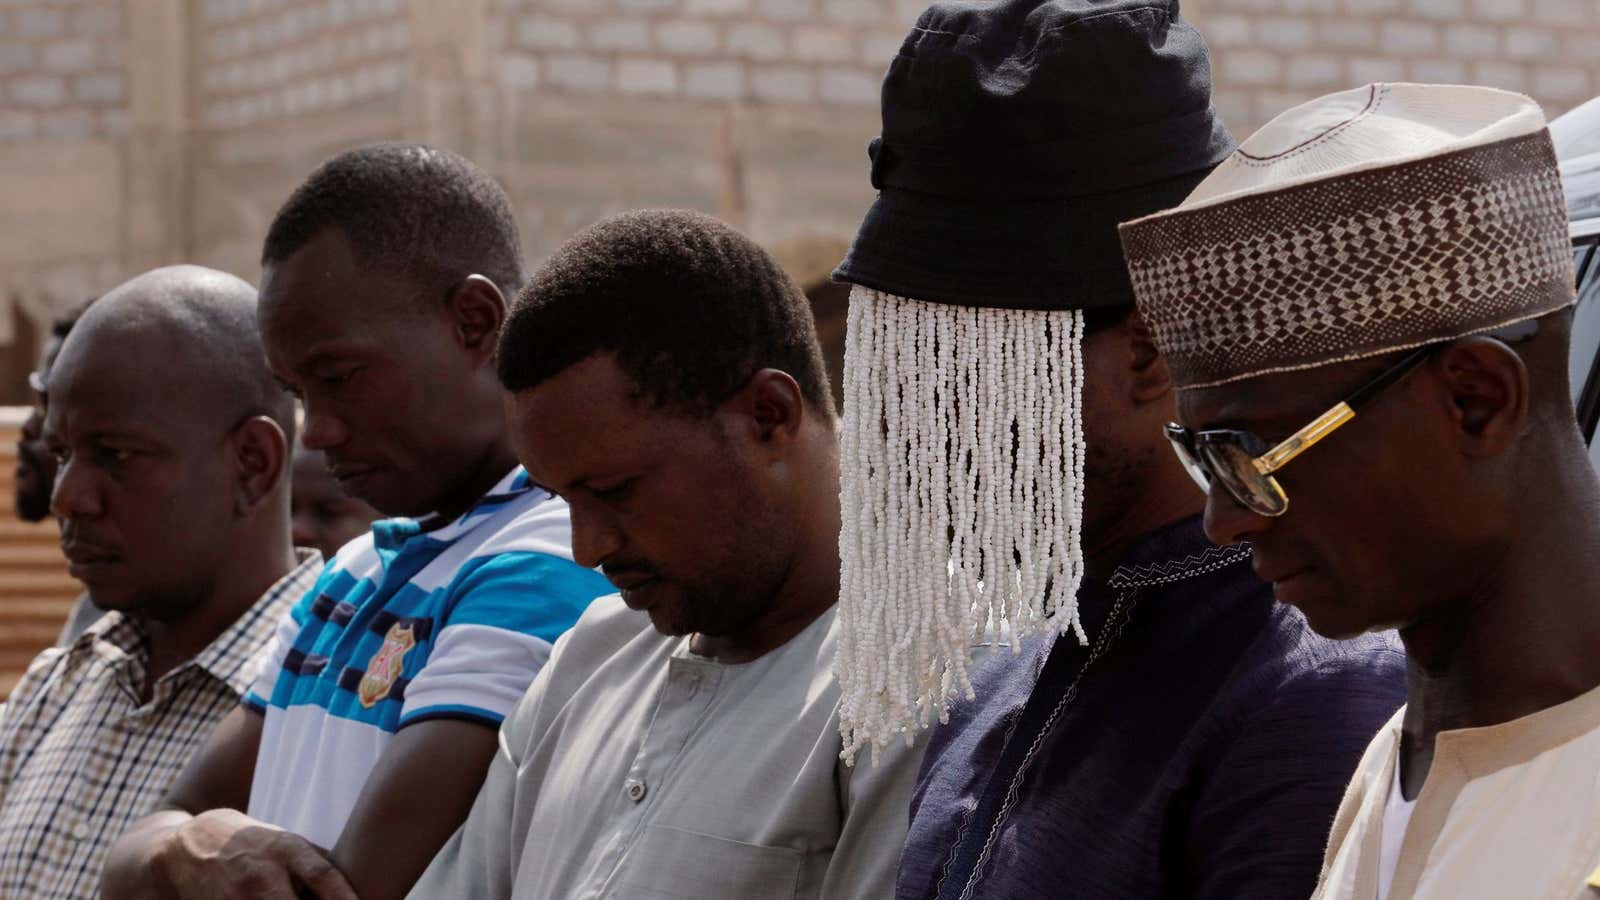 Undercover journalist Anas Aremeyaw Anas prays with others for his slain colleague Ahmed Hussein-Suale, an investigative journalist who was killed by gunmen on Wednesday, at Madina Central Mosque in Accra, Ghana Jan.18, 2019.